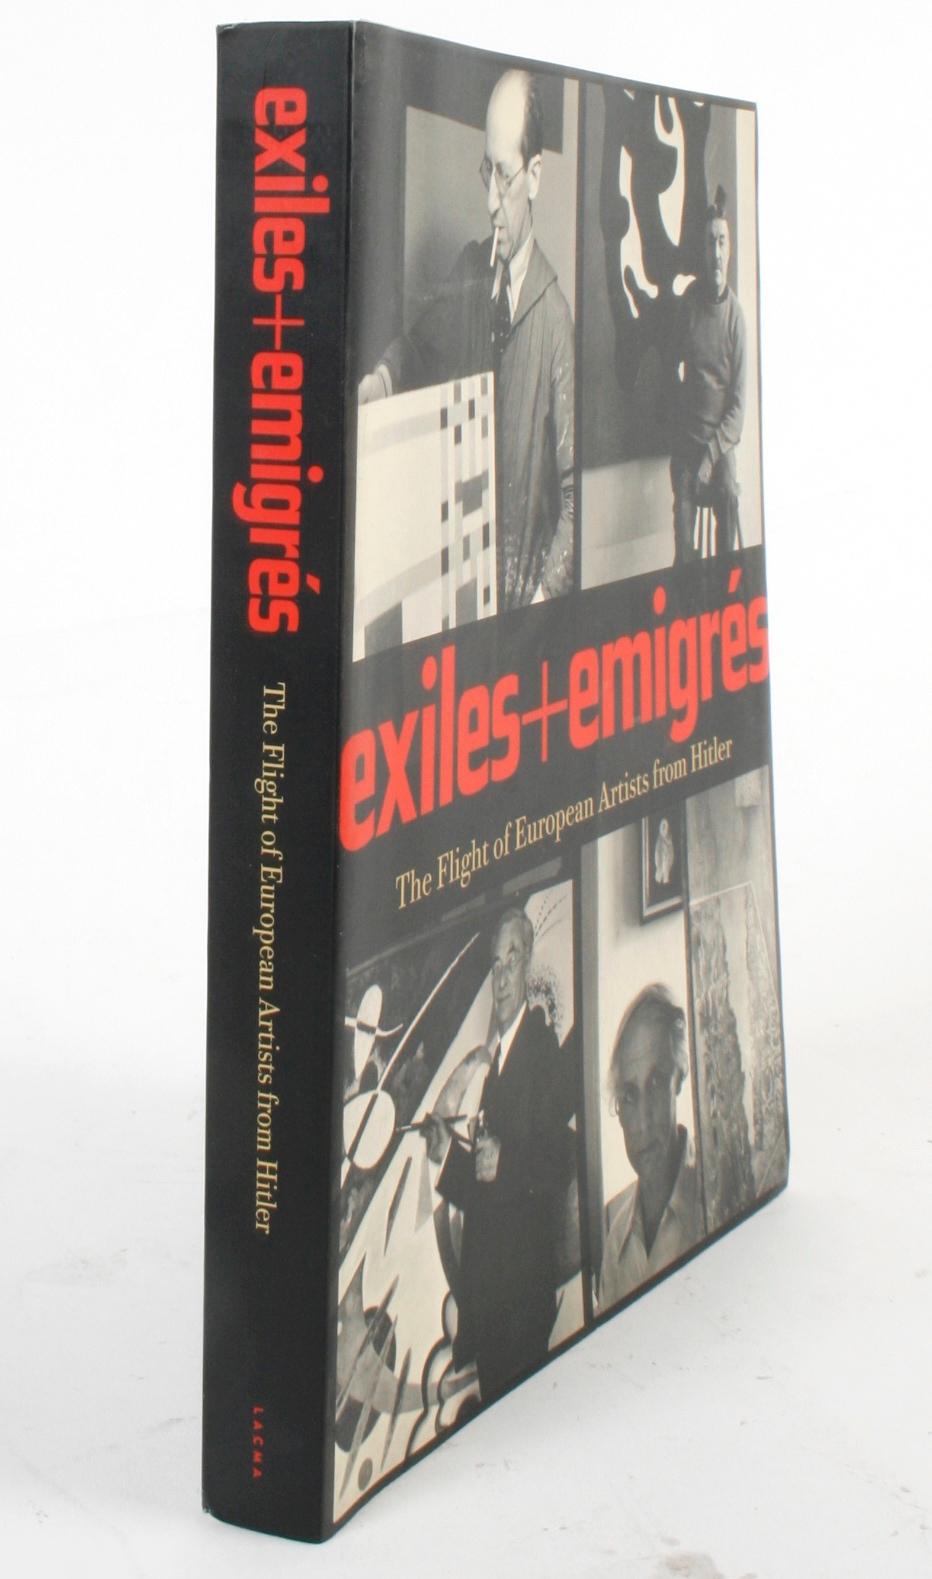 Exiles and Imigrés, The Flight of European Artists from Hitler, First Edition For Sale 8